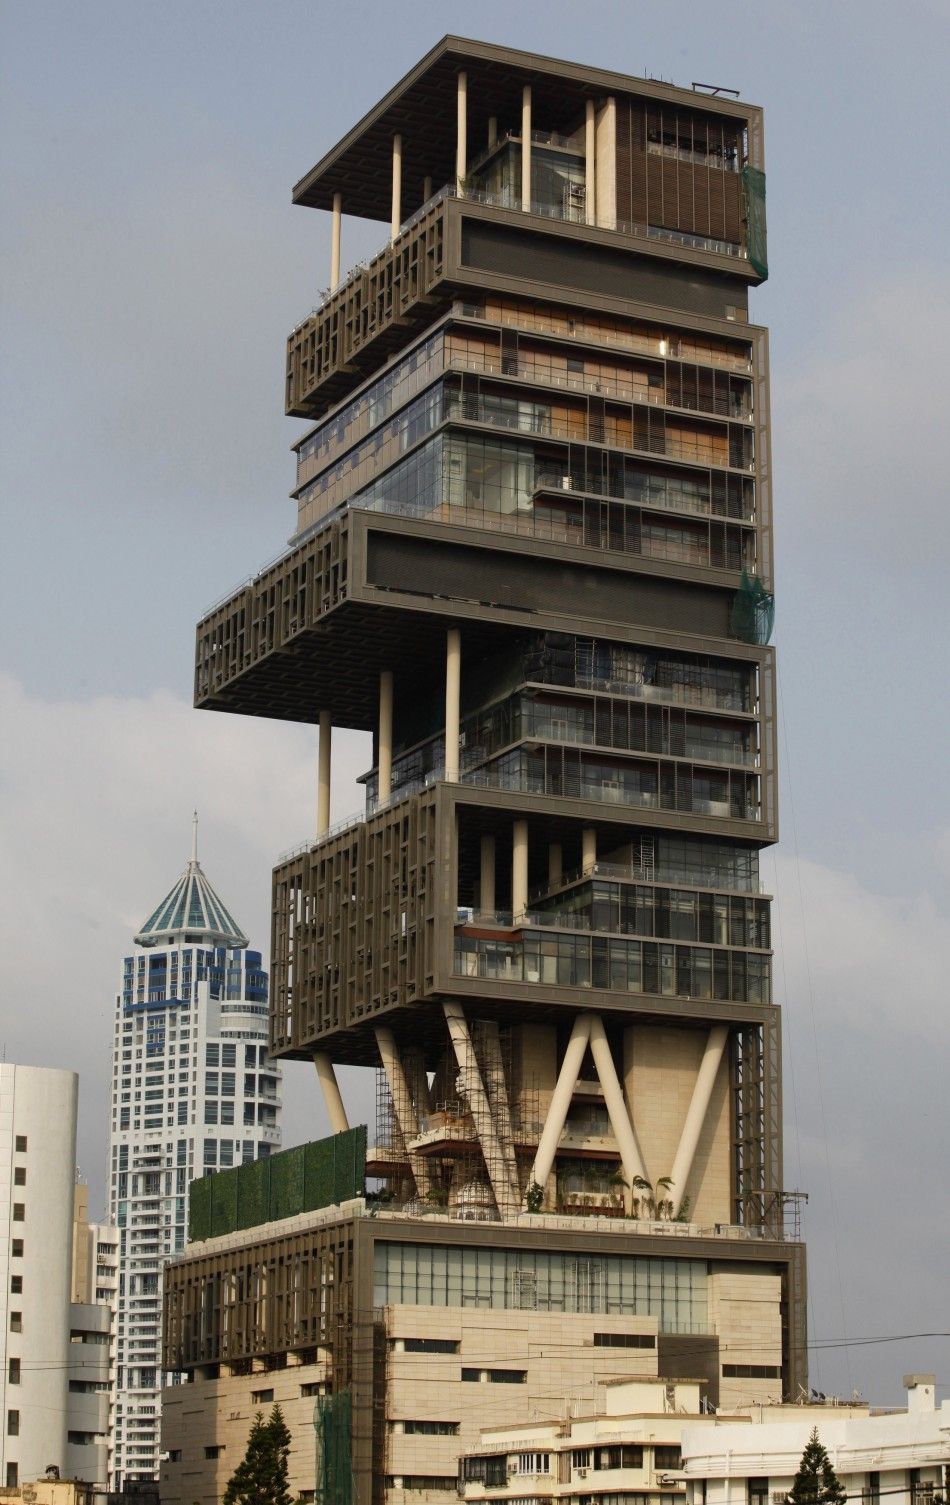 Worlds Most Expensive House Ambani Family Unveil Interior of Antilia for First Time